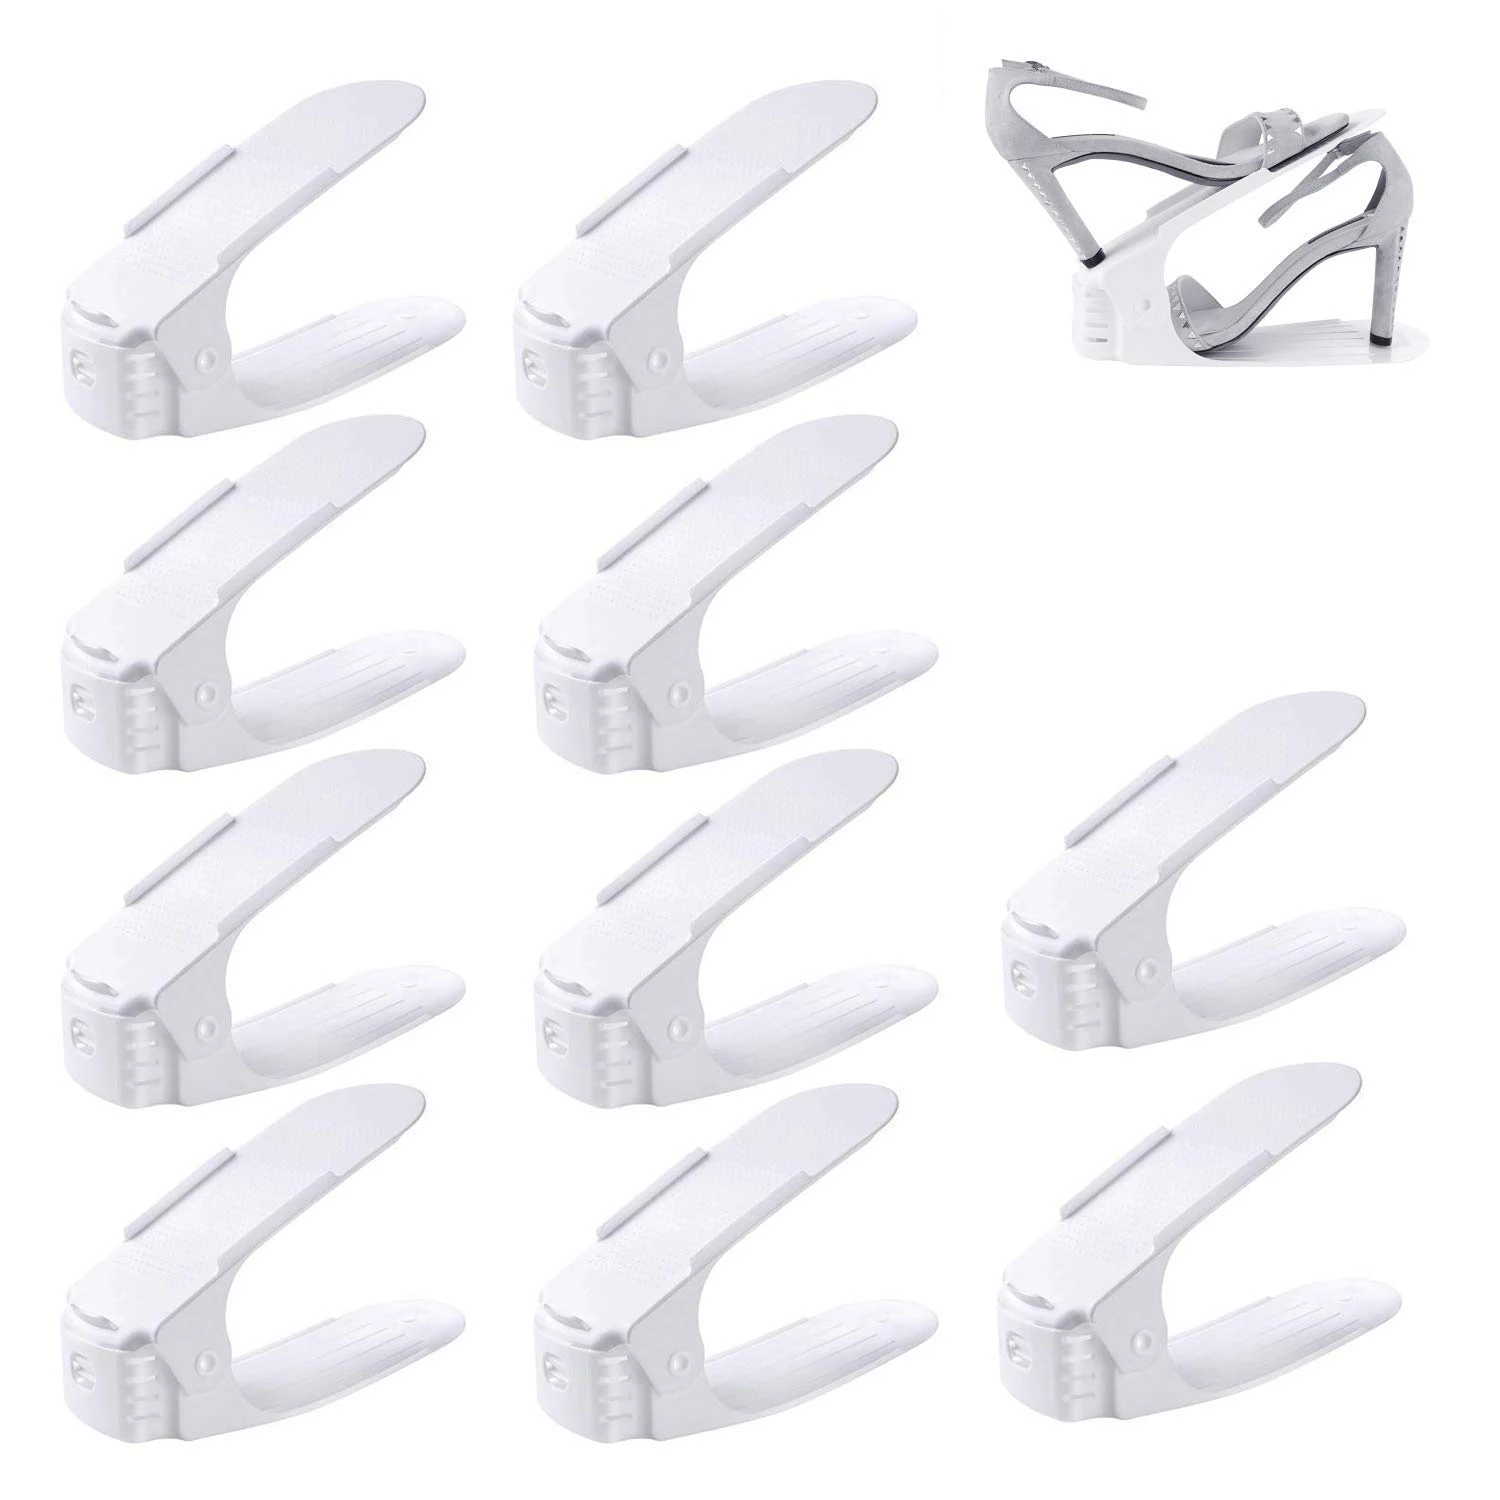 

CSS Lot DE 10 Adjustable Shoe Support For To Stack Shoes Shoe Organizer Space Saver a Shoes Support Rack Plastic White